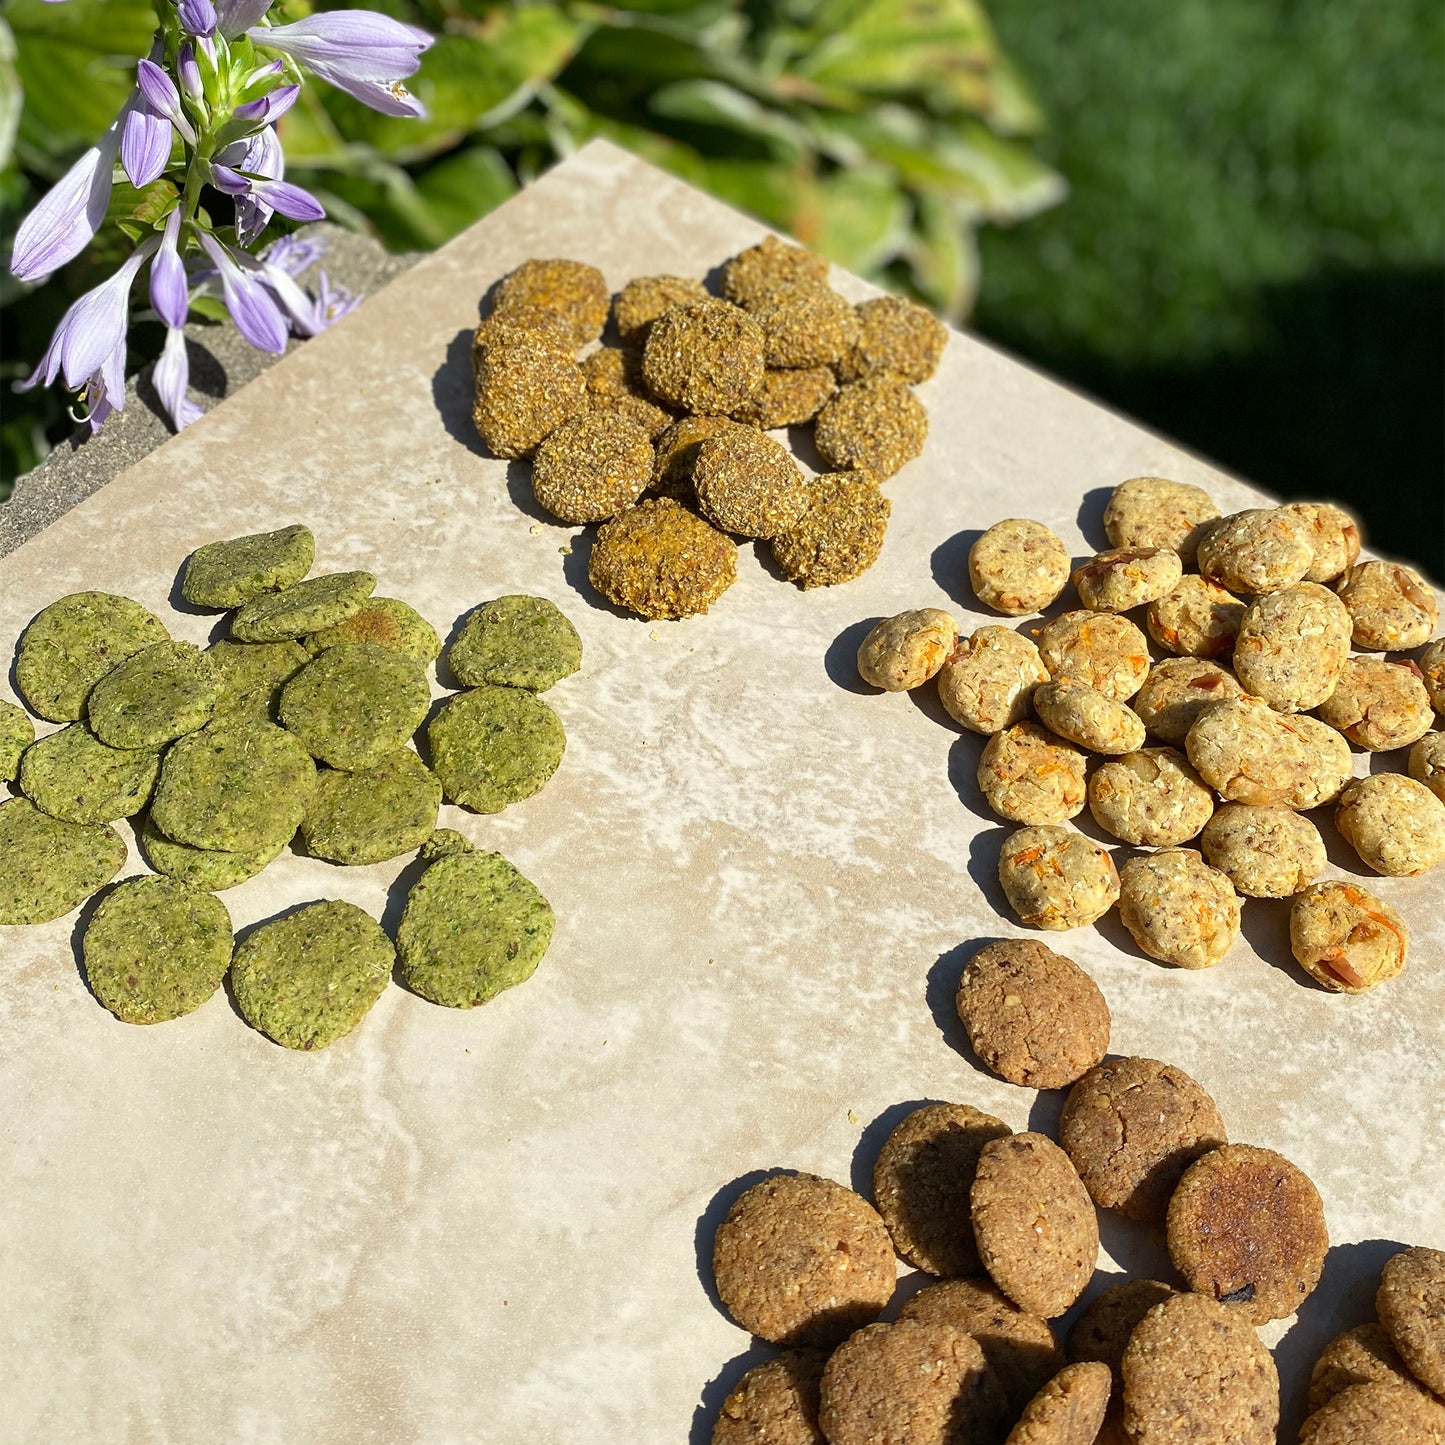 Image showcasing Wagging Companions' assortment of dog treats presented outside of their packaging. The image displays the Pumpkin Spice Oatmeal, Carrot Cake, Side Salad, and PB&B (Peanut Butter and Banana) blends, offering a visual display of the varied treats available, each designed to cater to different canine tastes and preferences.